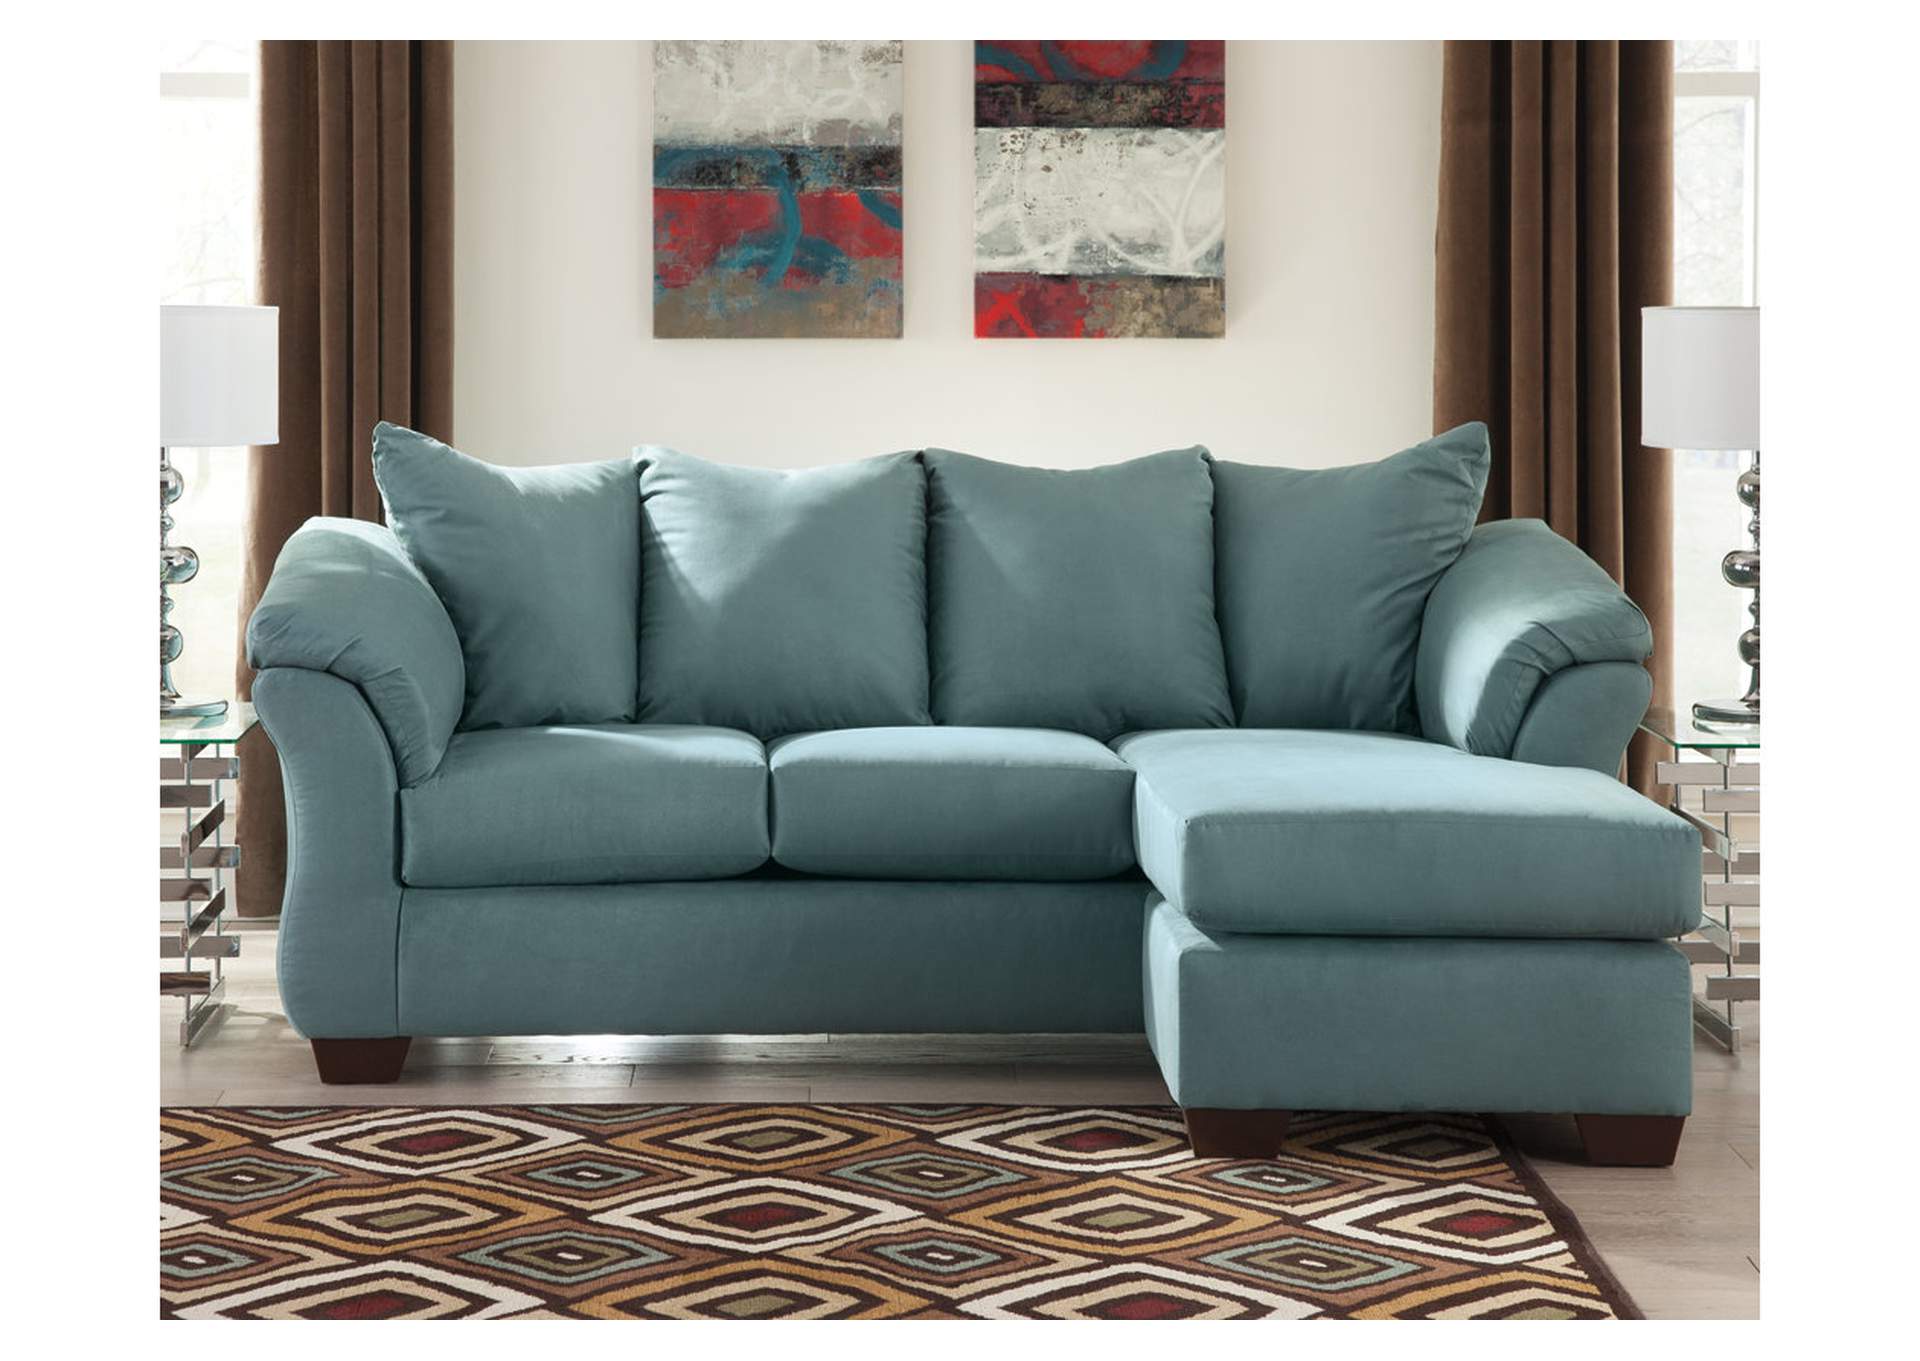 Furniture Expressions Fayetteville Ga Darcy Sky Sofa Chaise